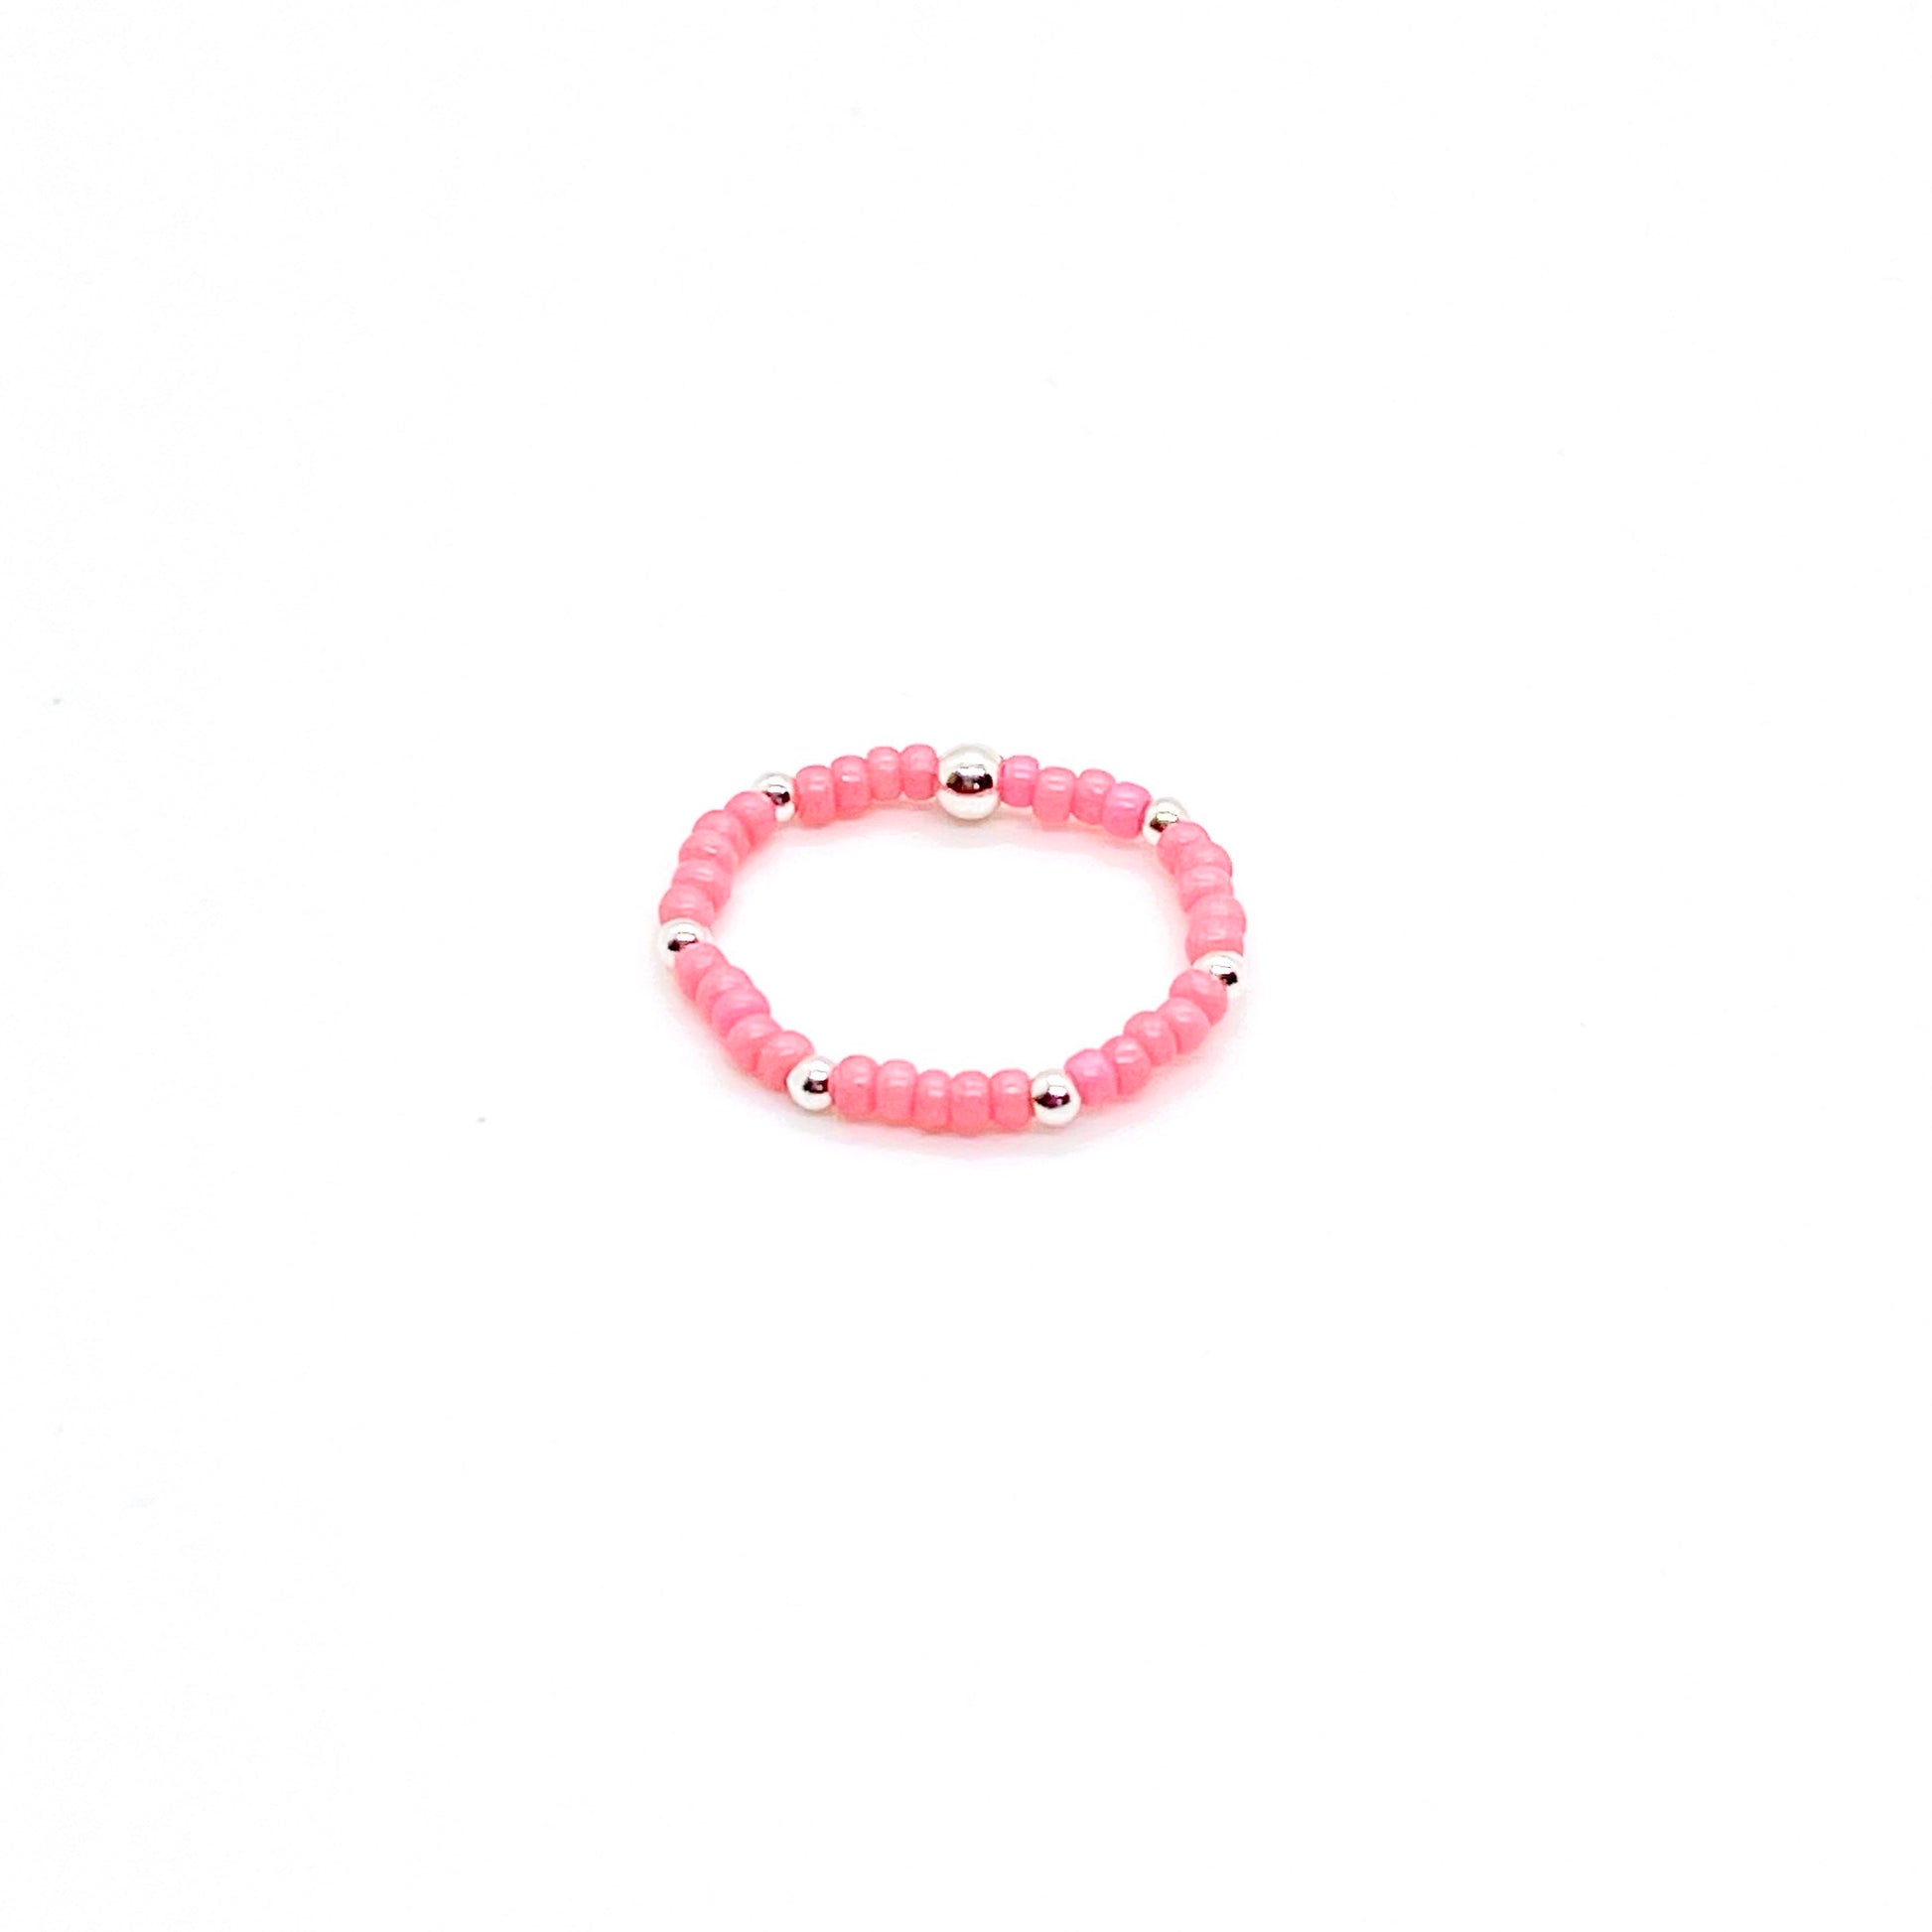 Stretch rink with pink seed beads and 2mm sterling silver waterproof accent ball beads.